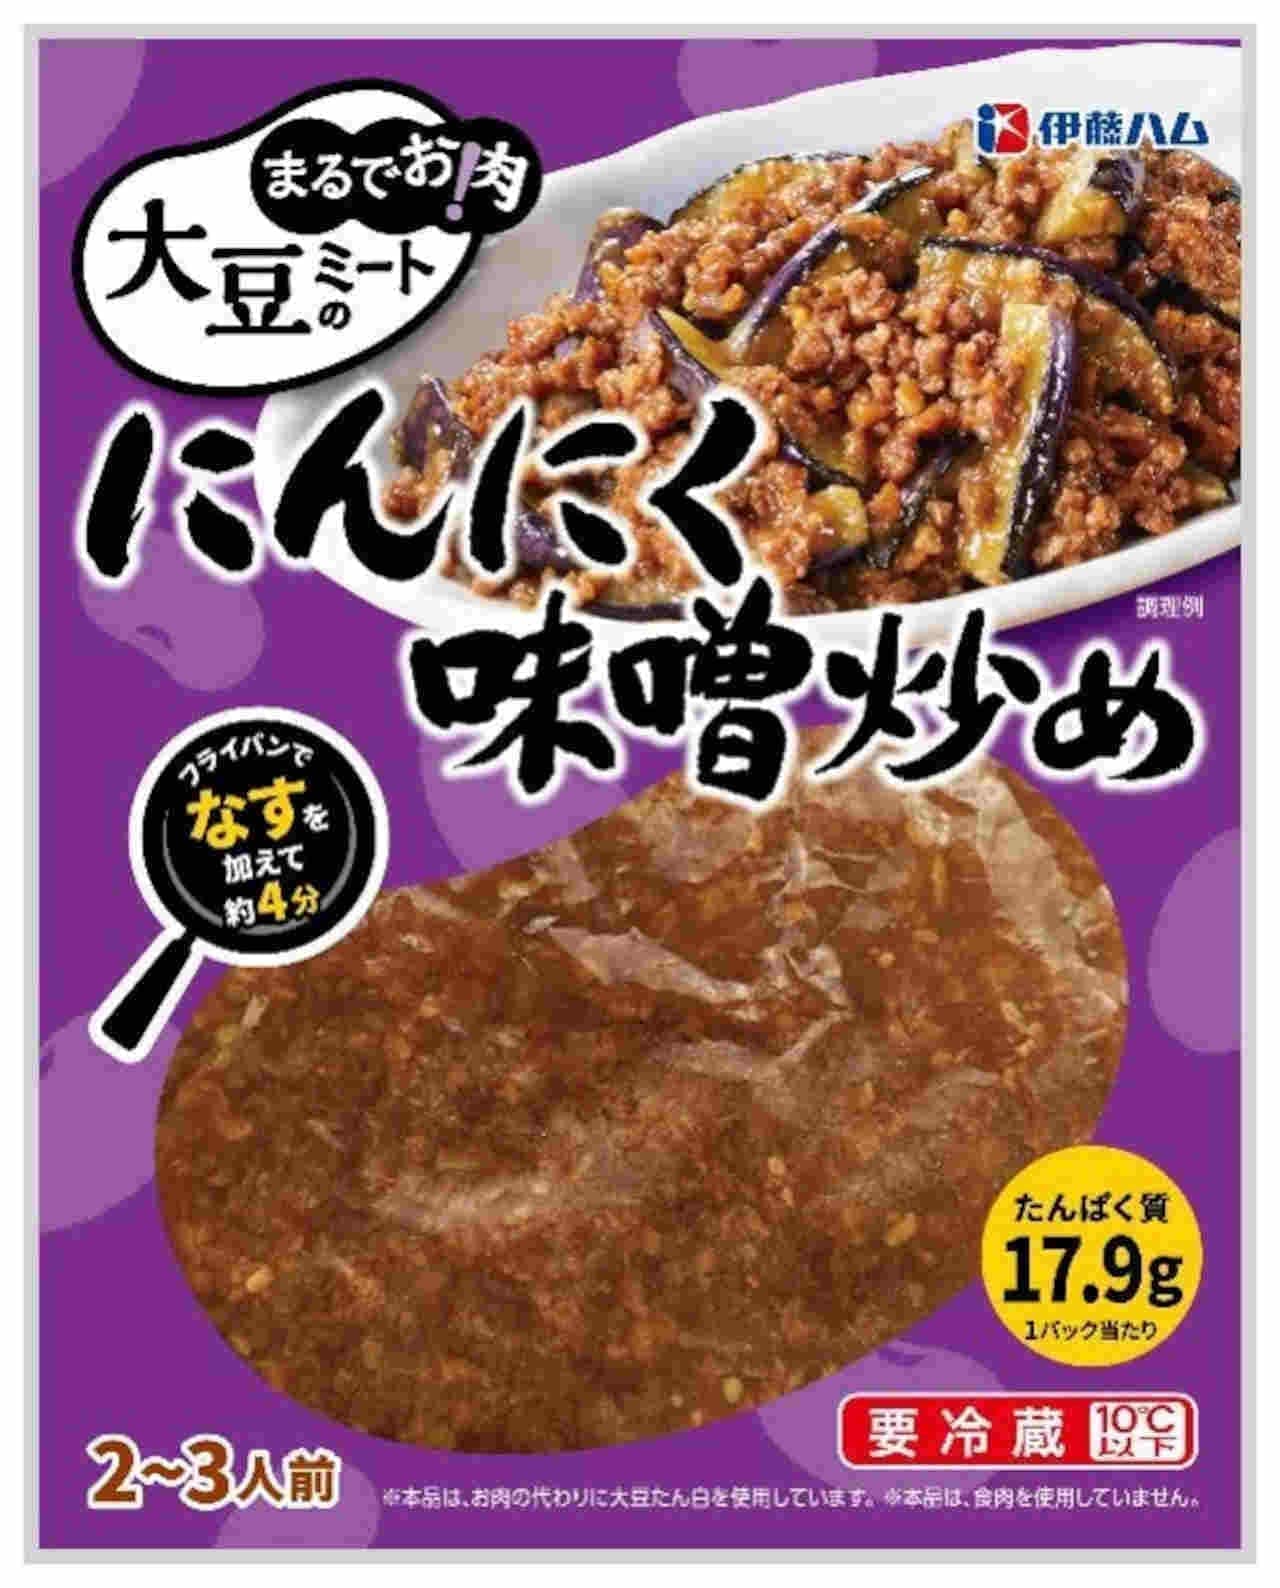 Itoham's soy meat "It's like meat!"